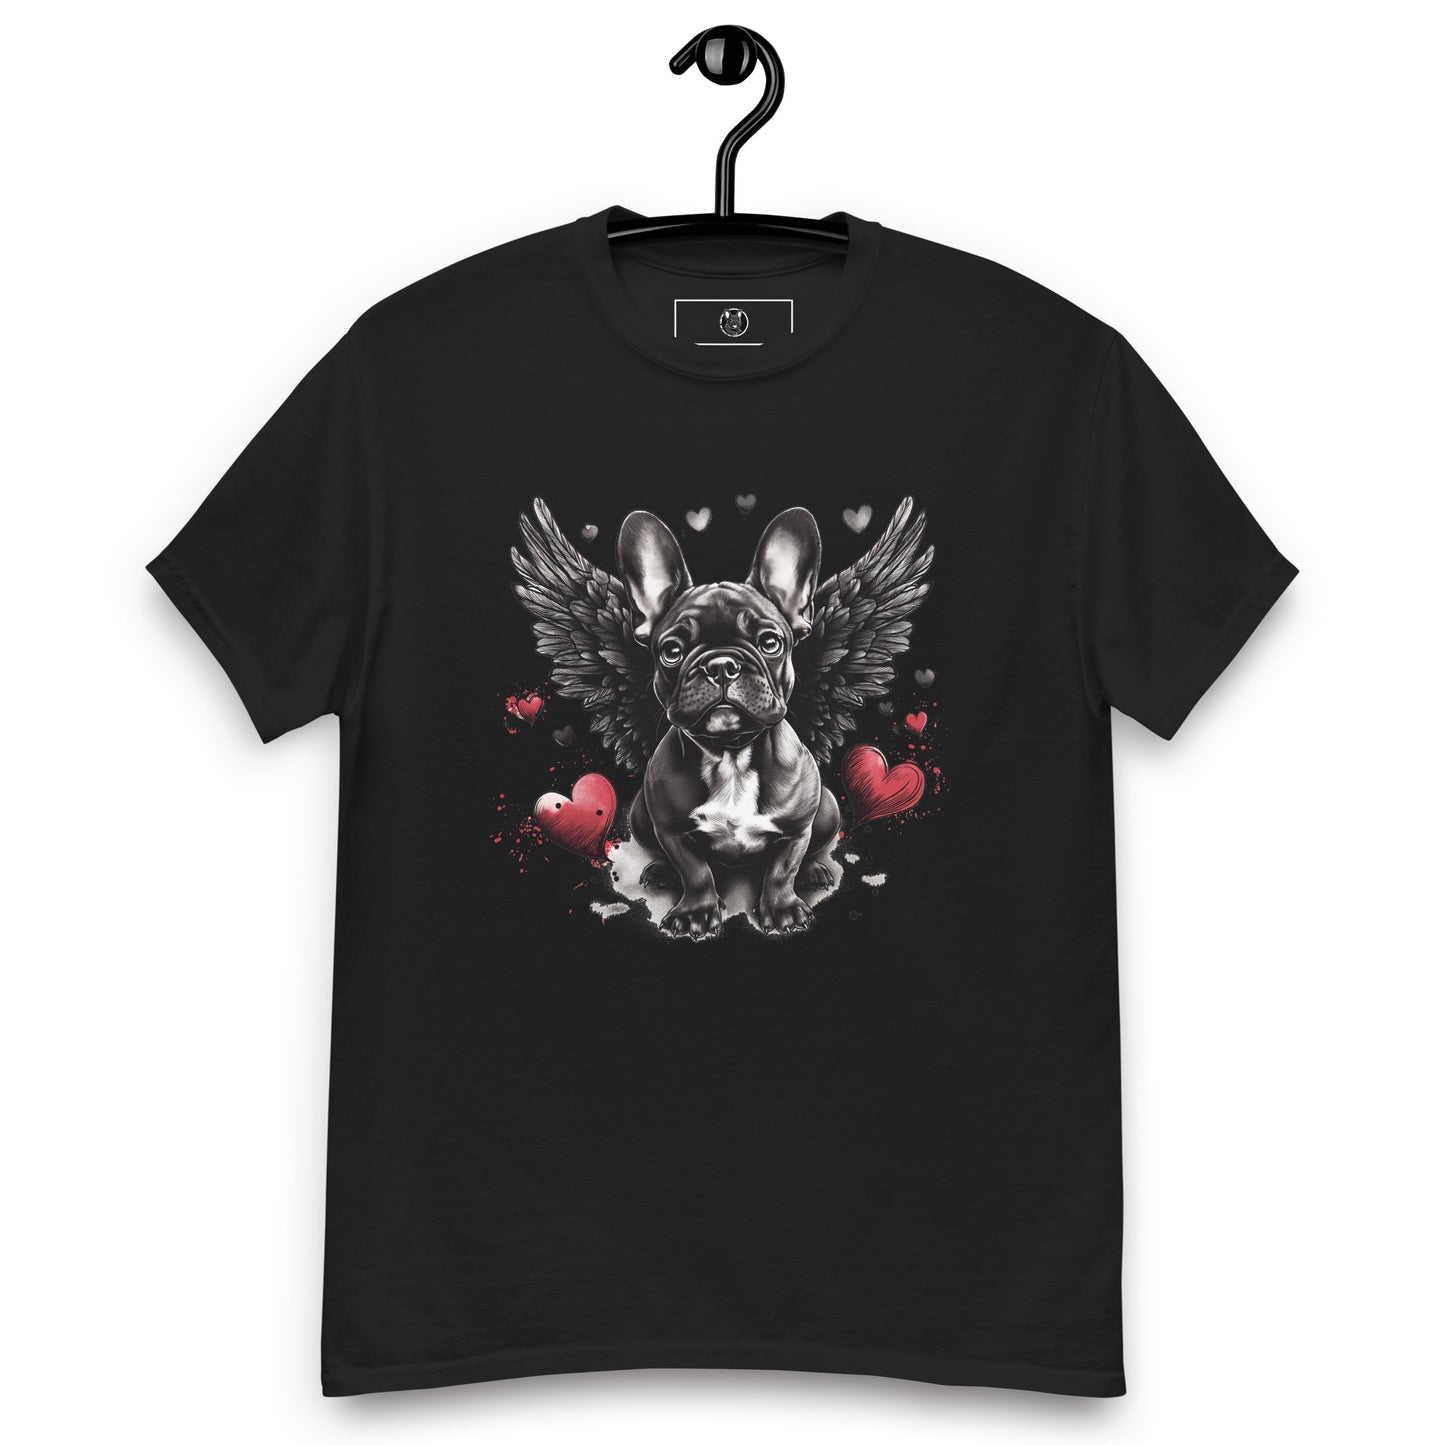 "Heavenly Hearts Frenchie" Unisex T-Shirt